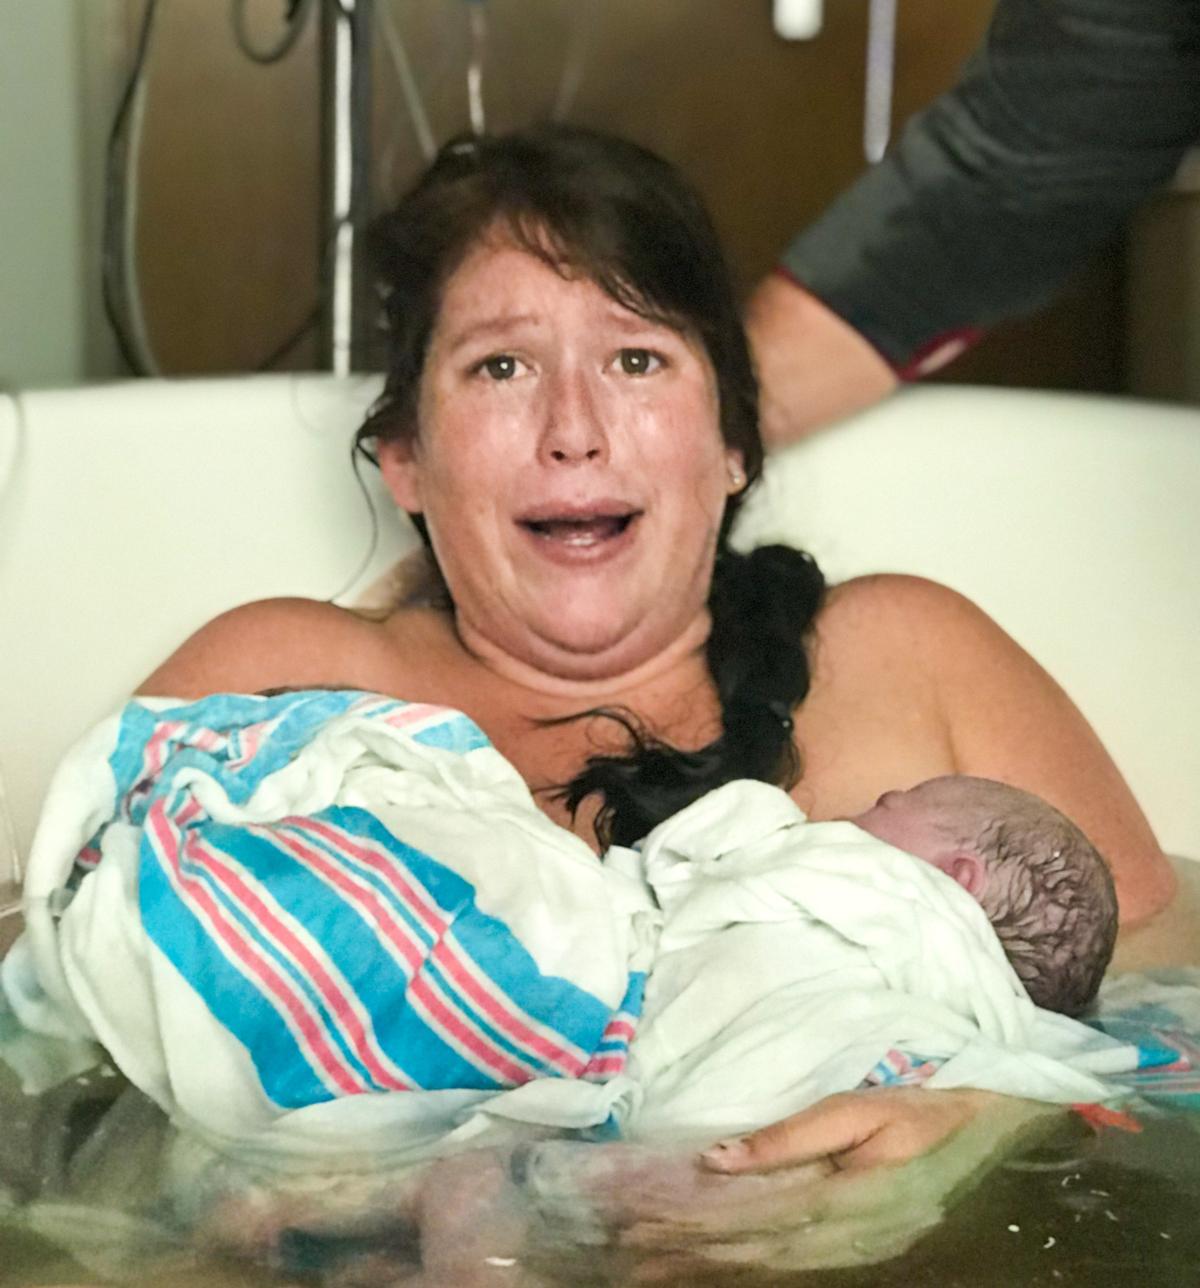 Lyndsey Altice gives birth to a surprise twin. (Caters News)